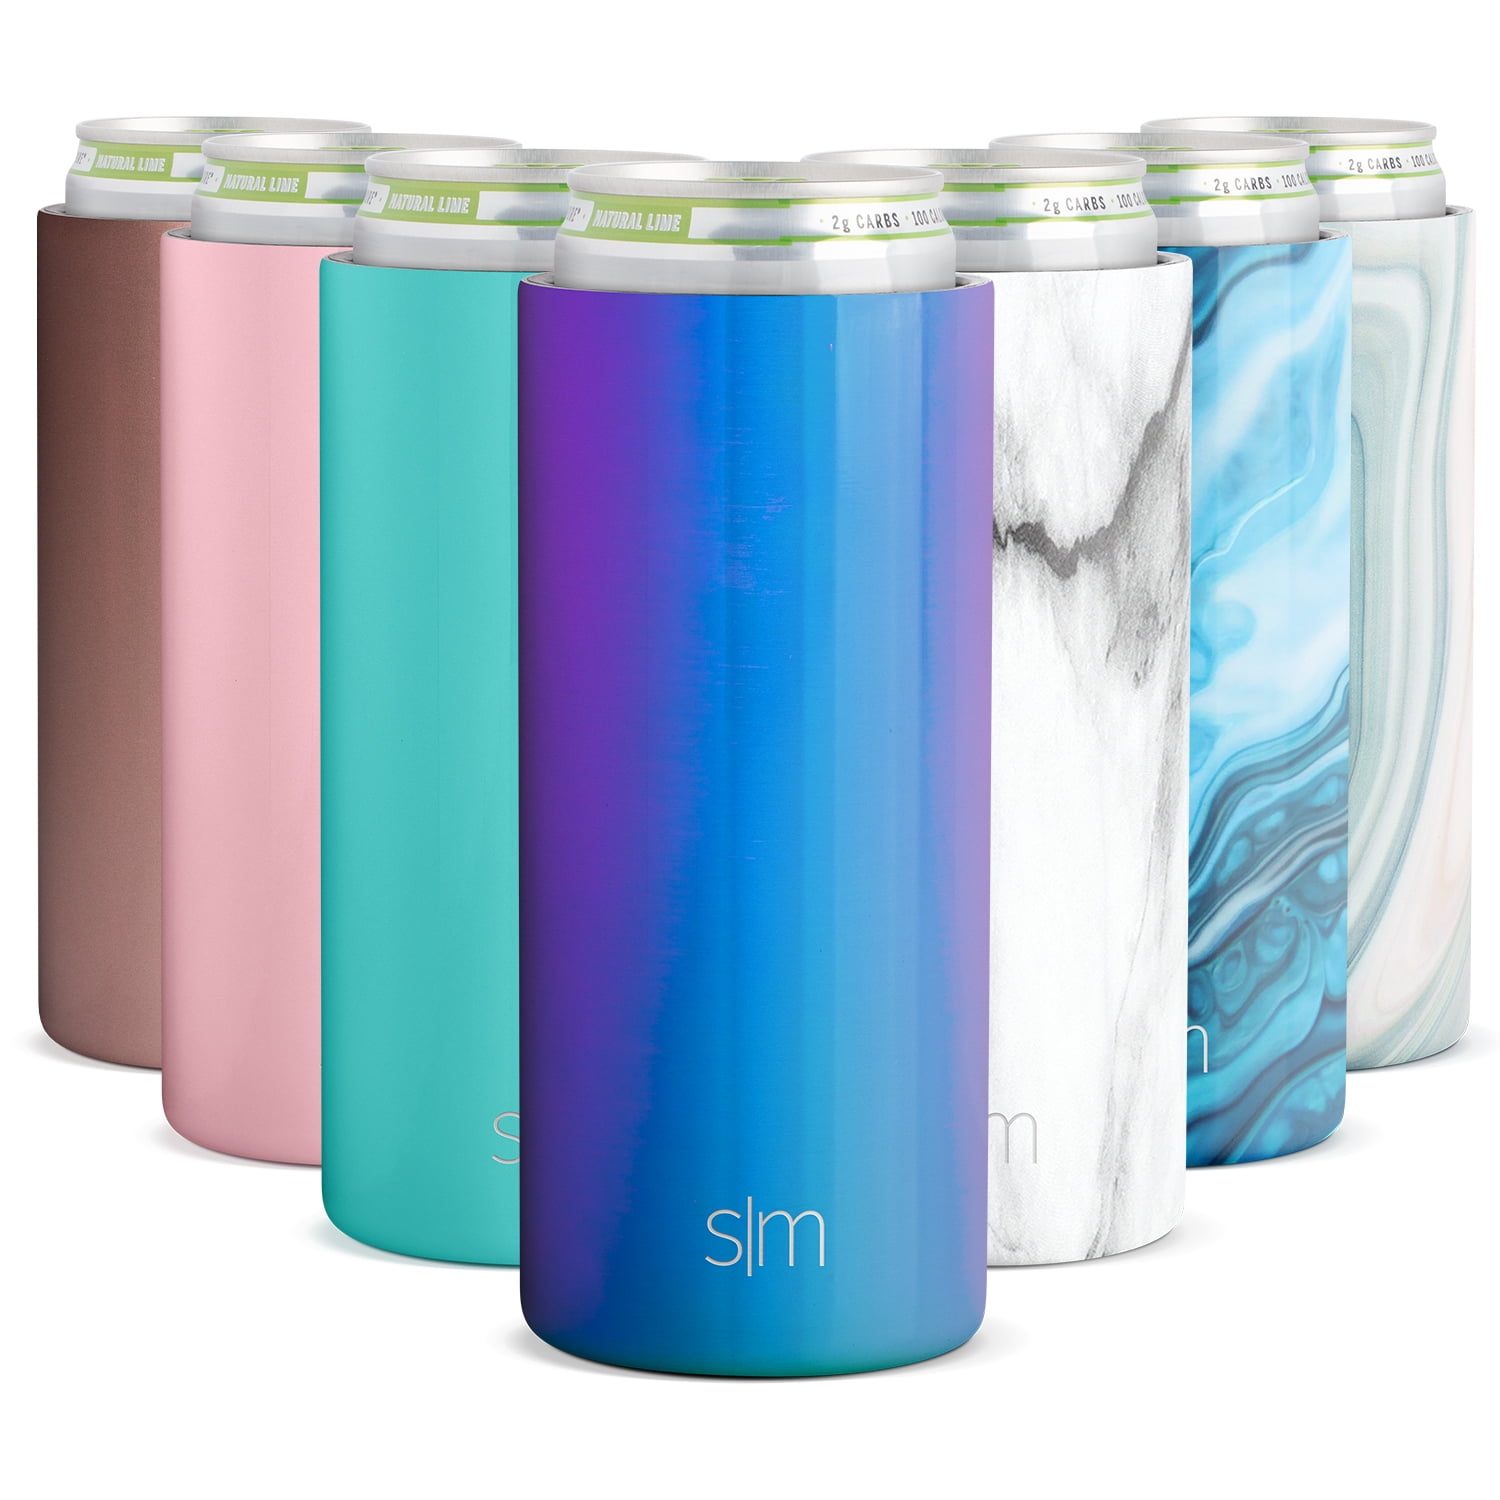 Host Stay-chill Beer Cozy Insulated Can Cooler Tumbler - Double Walled  Stainless Steel Beer Can Insulator Holder For Slim Sized Cans - Lagoon :  Target